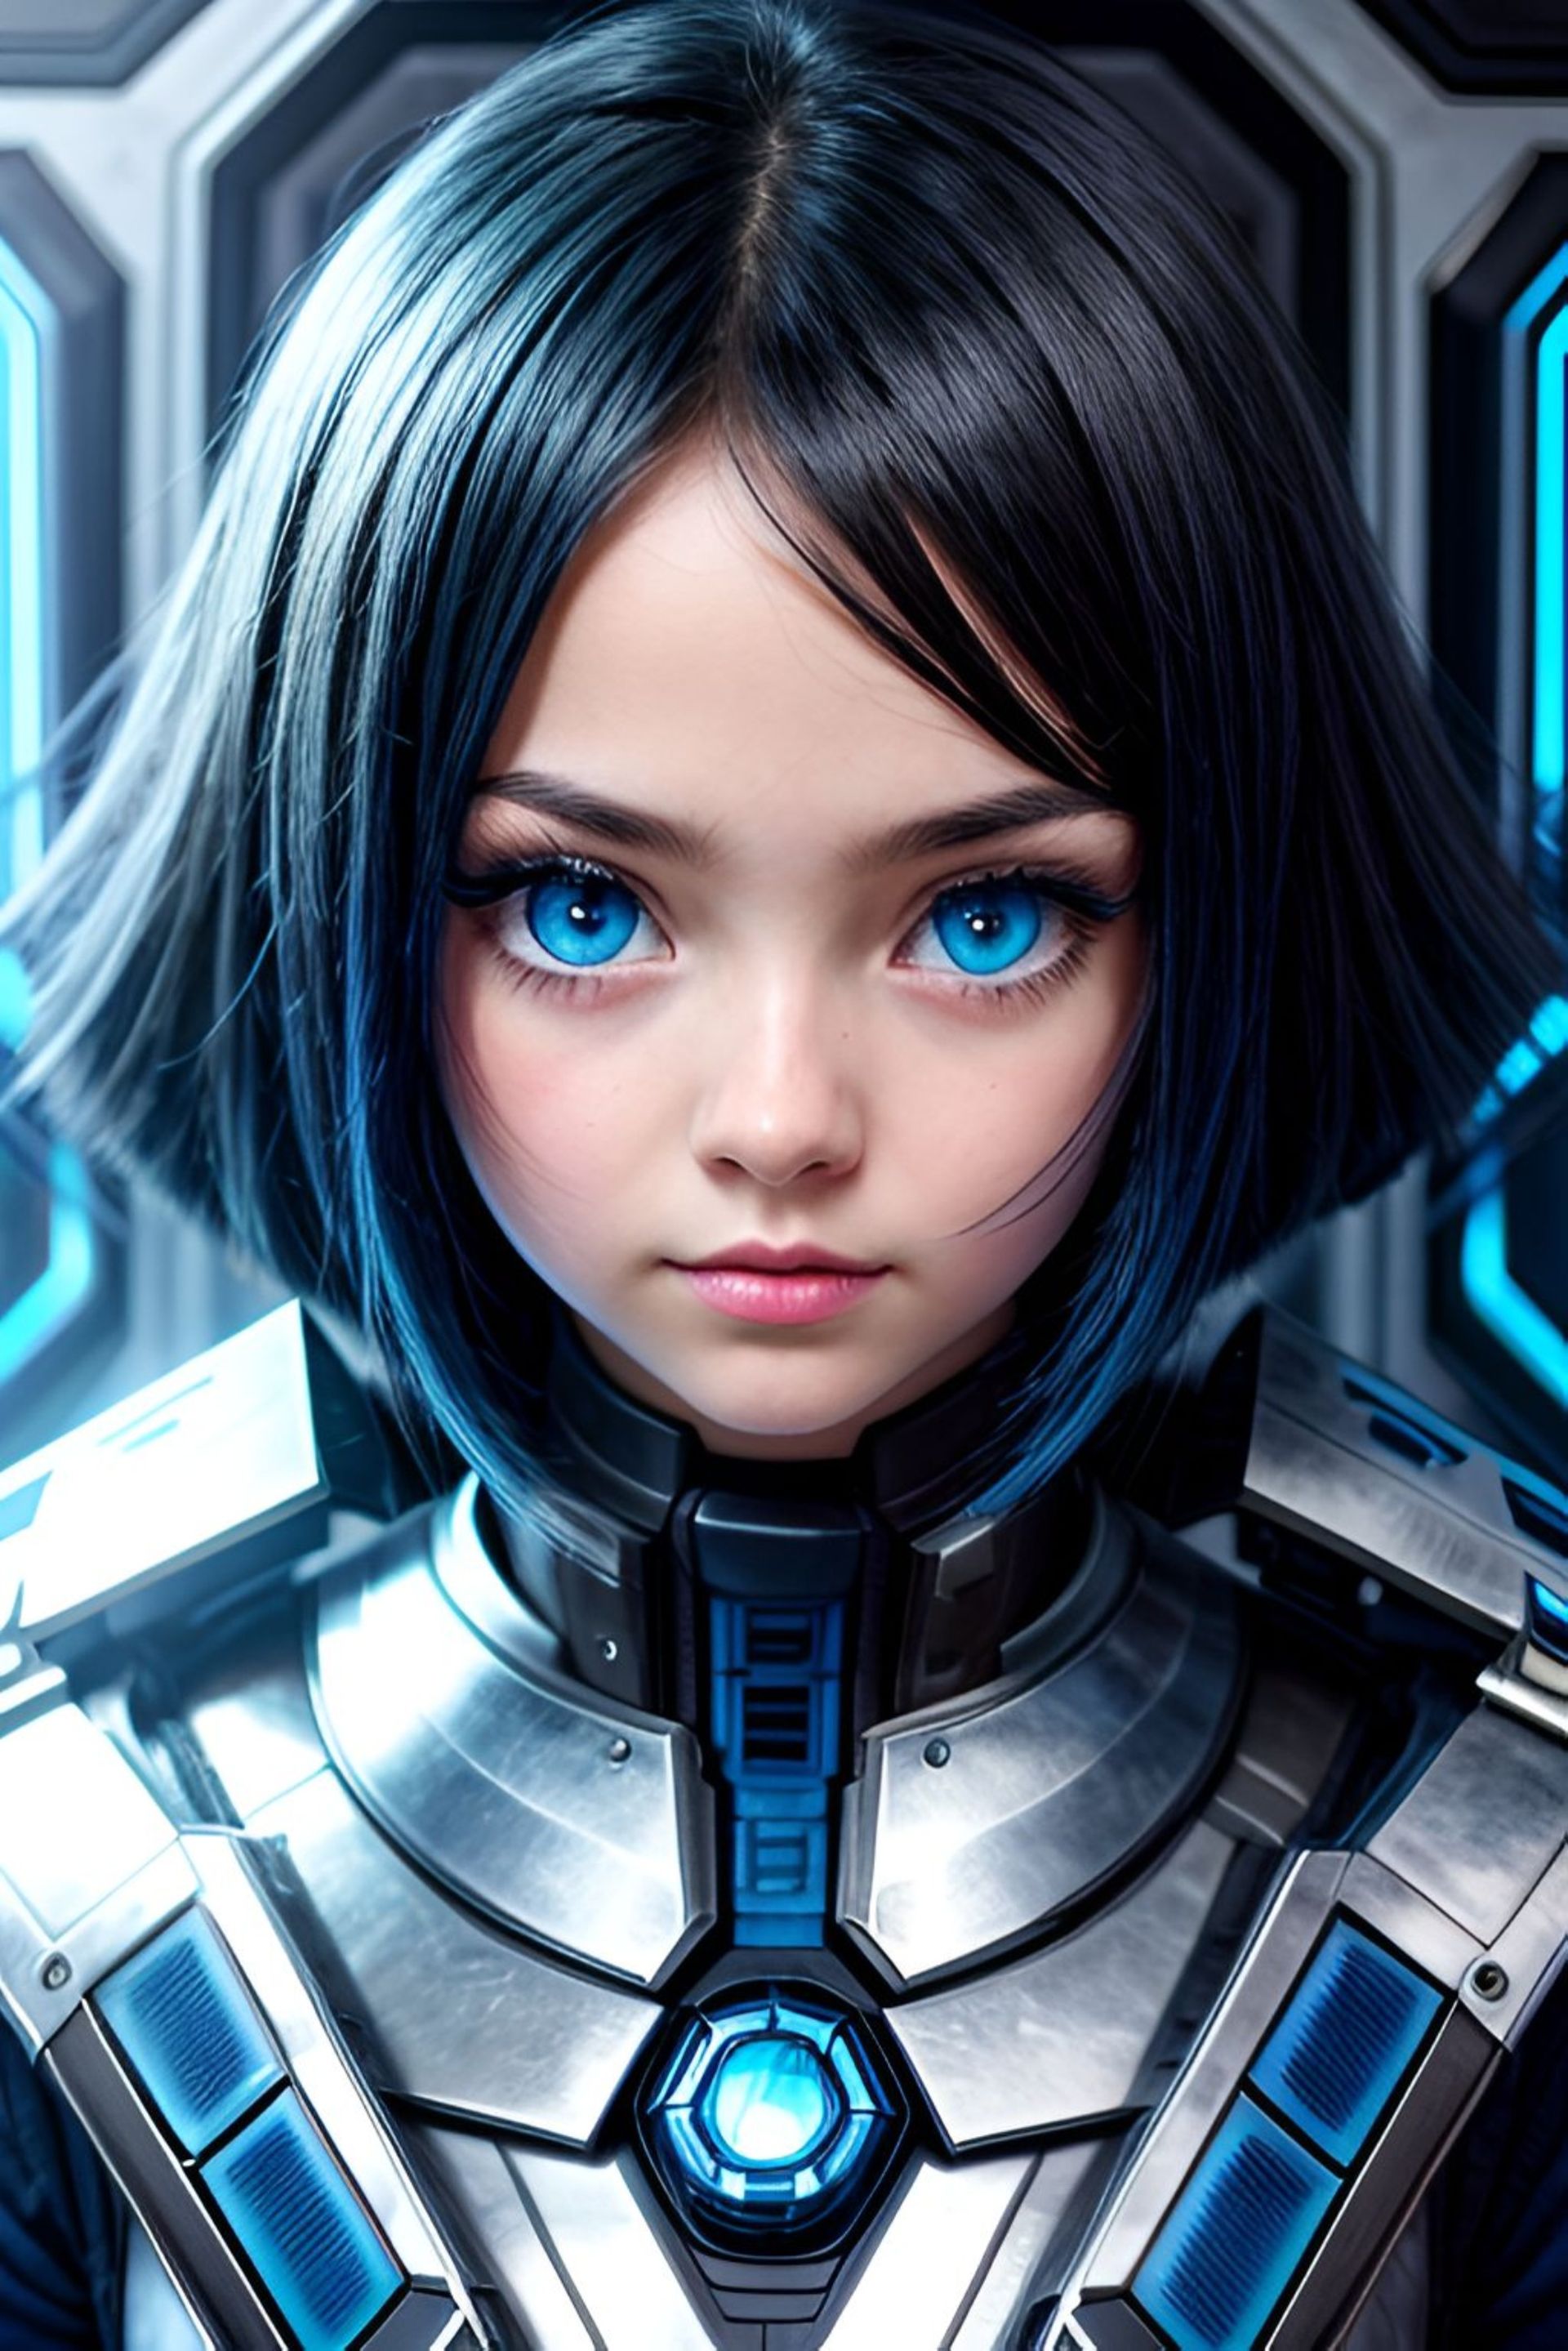 Free photo A girl, cyborg, with short hair, wearing armor.